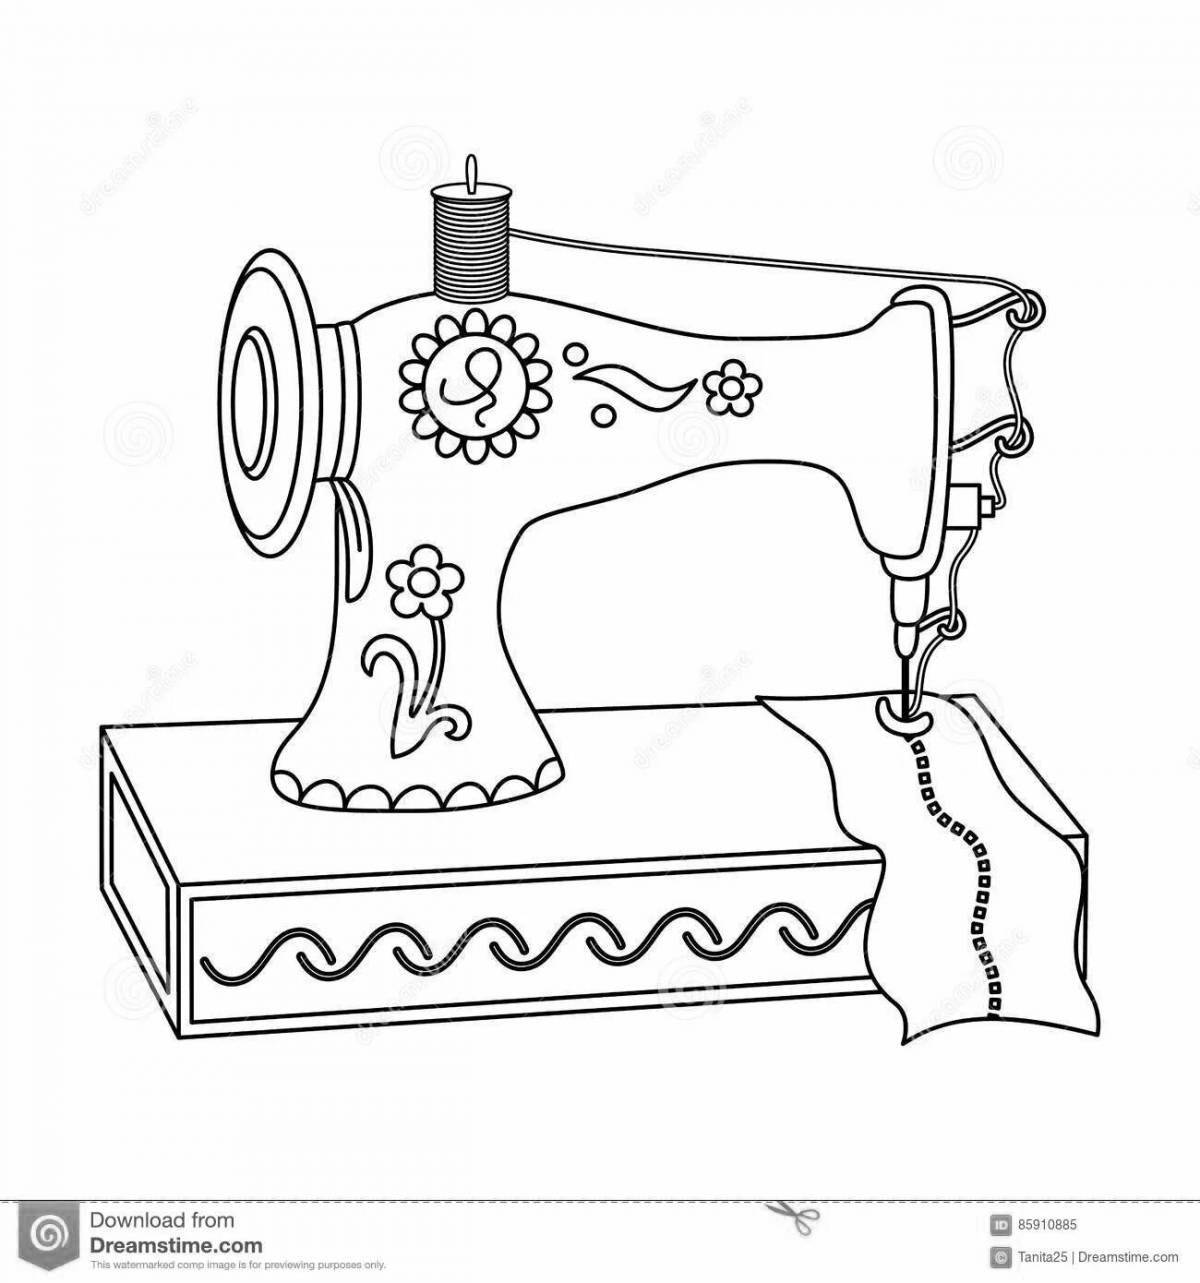 Fancy sewing machine coloring book